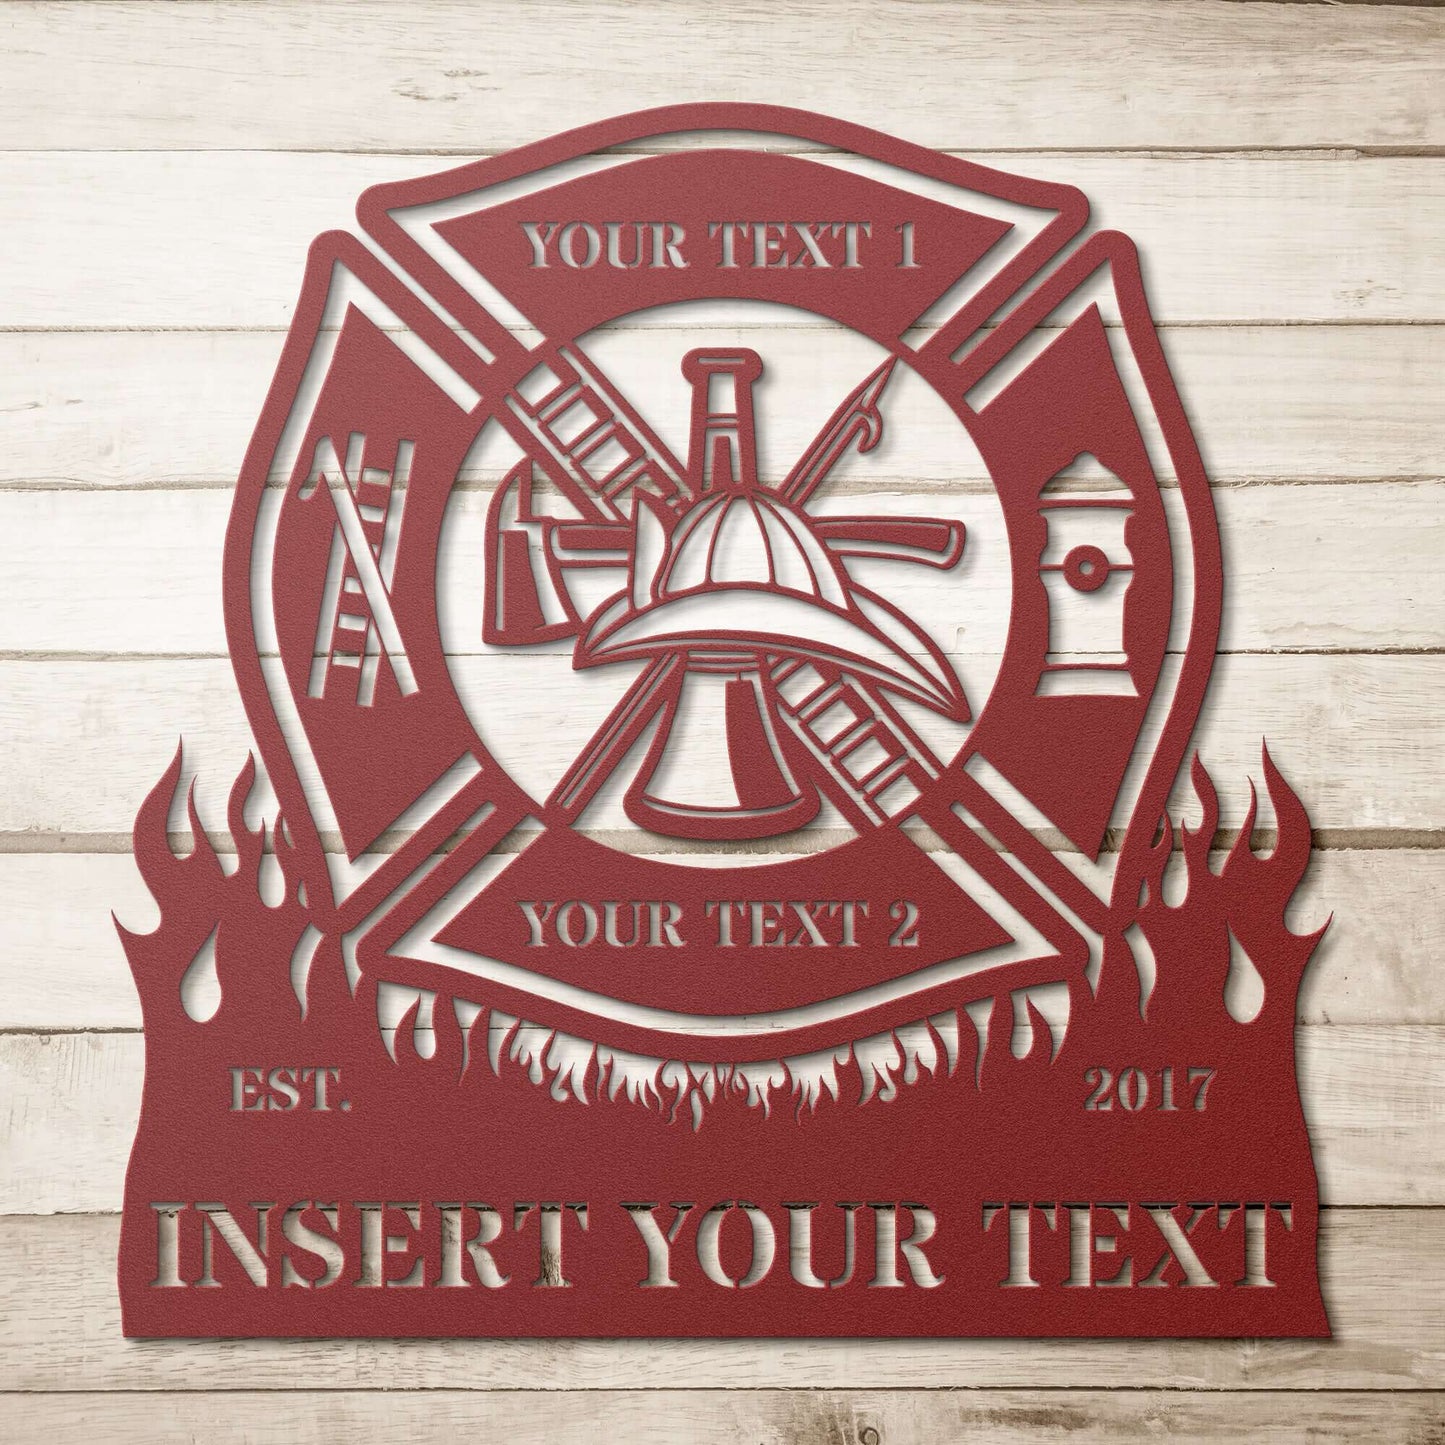 firefighter Gifts, firefighter wall decor, firefighter metal sign, firefighter dad, gift for firefighter, firefighter decoration, firefighter truck, firefighter life, firefighter steel sign, firefighter  monogram, proud firefighter, firefighter heroFirefighter Personalized Maltese Cross Red Metal Sign With Your Custom Text